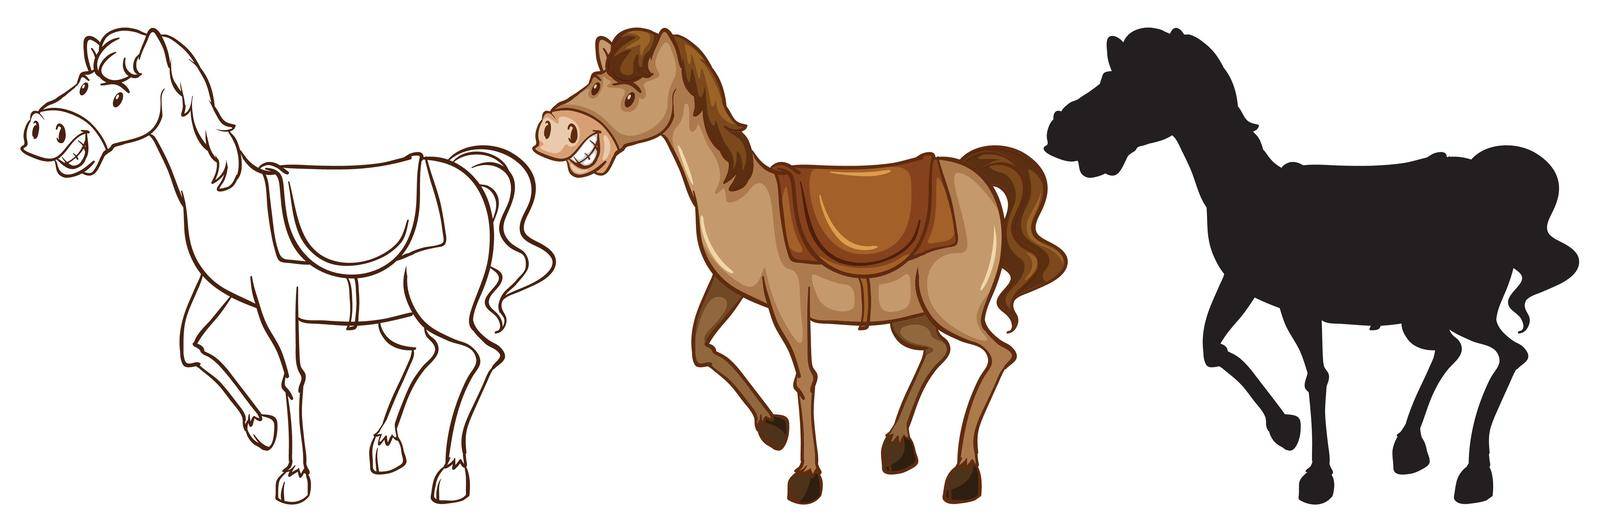 Illustration of the three horses on a white background